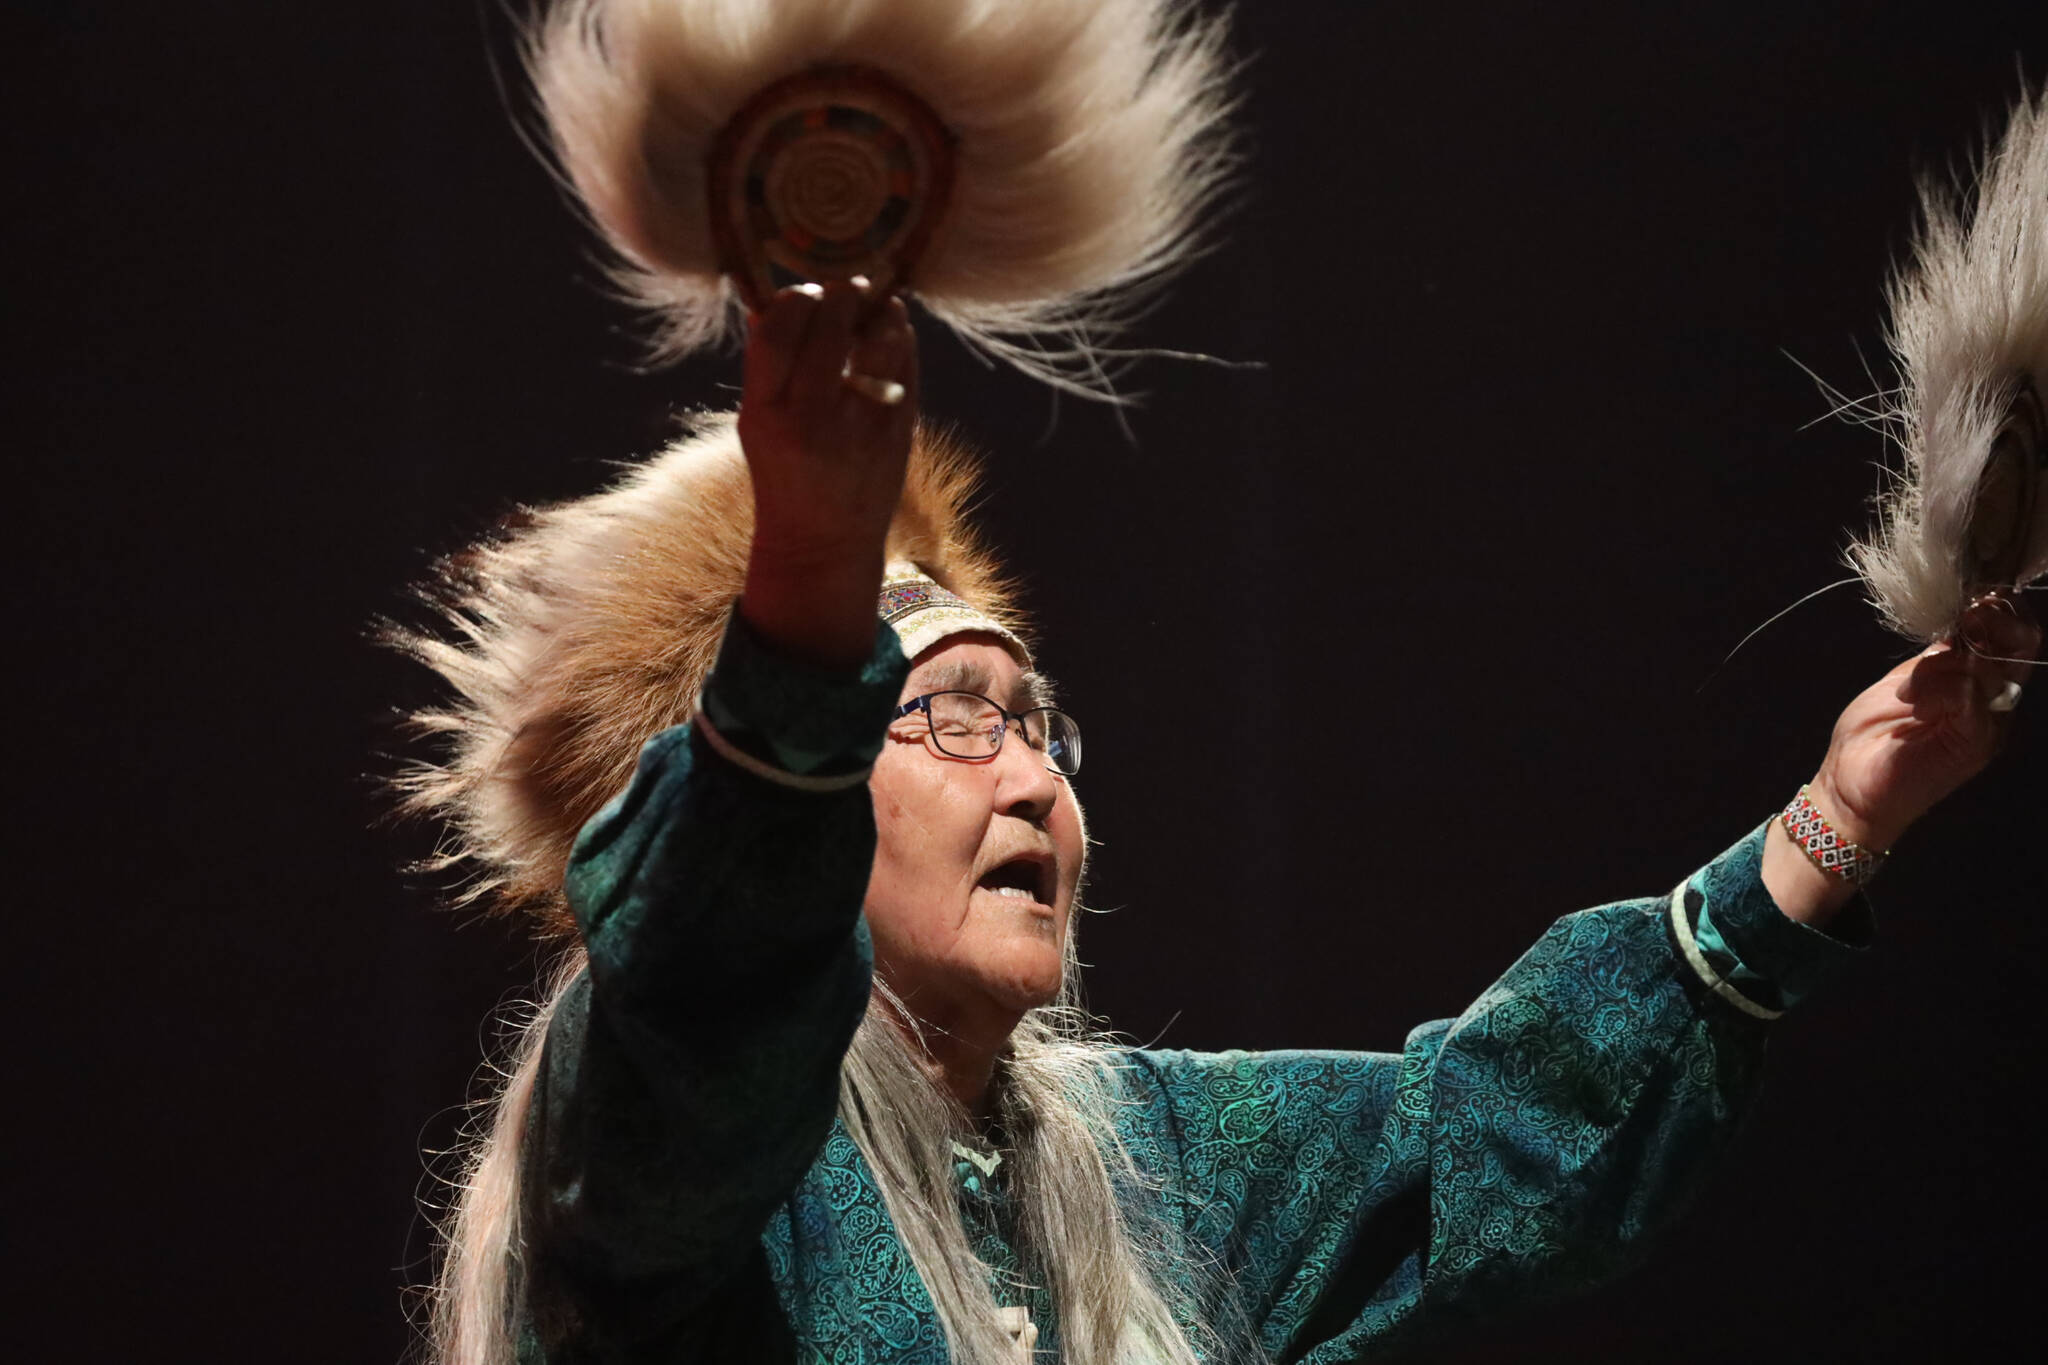 Marie Mead performs a traditional dance during the Inuit-soul musical group PAMYUA!’s performance as part of the final night of the Áak’w Rock music festival at Centennial Hall Saturday evening. (Clarise Larson / Juneau Empire)